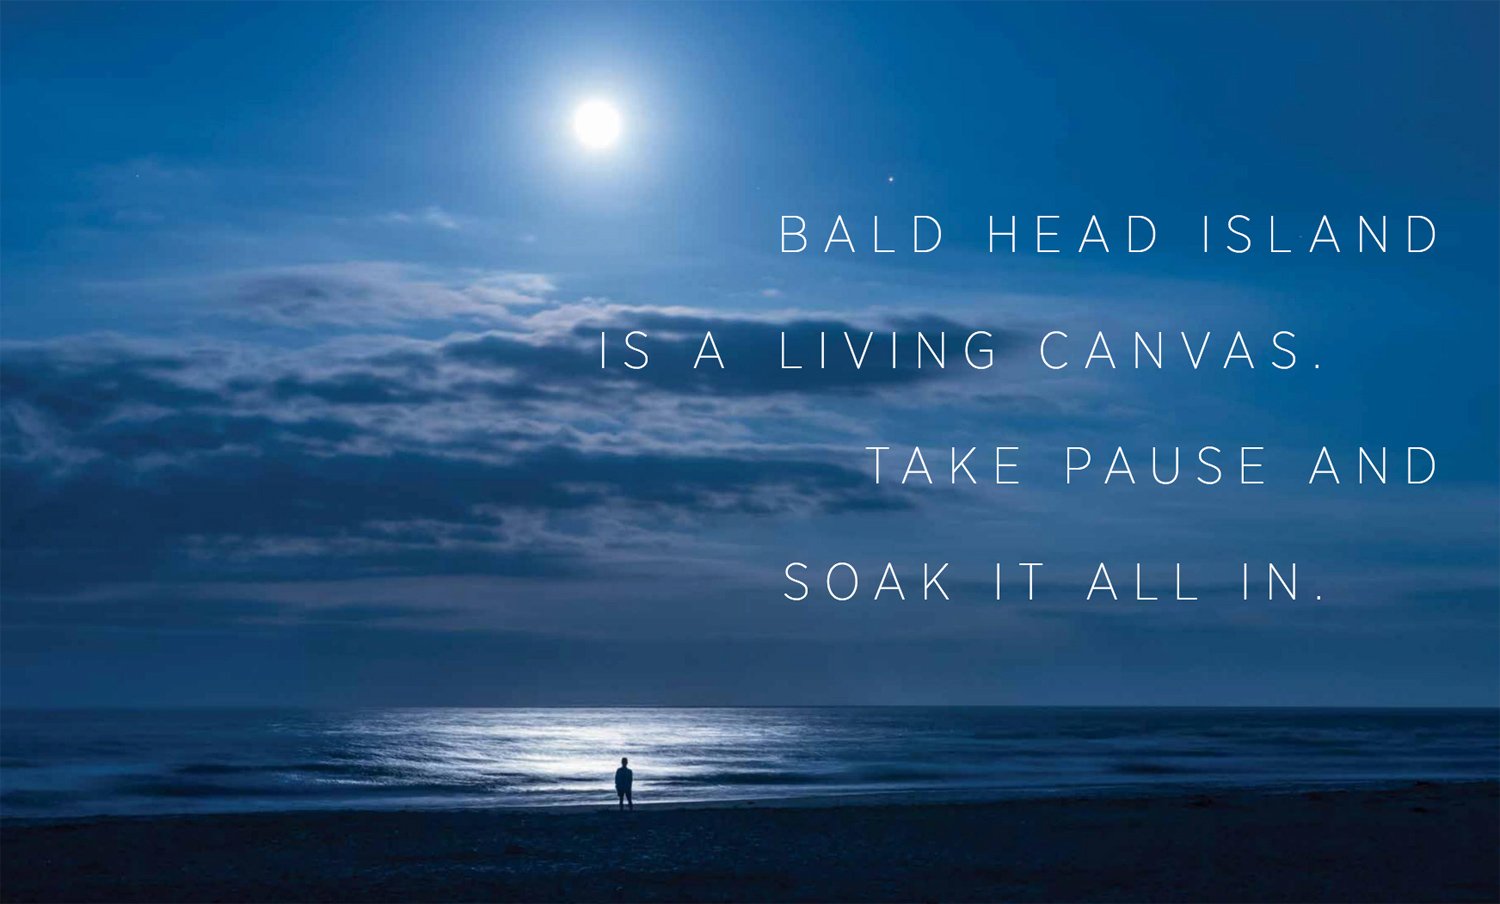 A tear sheet by C2 Photography for Bald Head Island featuring a zoomed-out photo of a lone person standing on the shore looking out at the ocean in the moonlight.